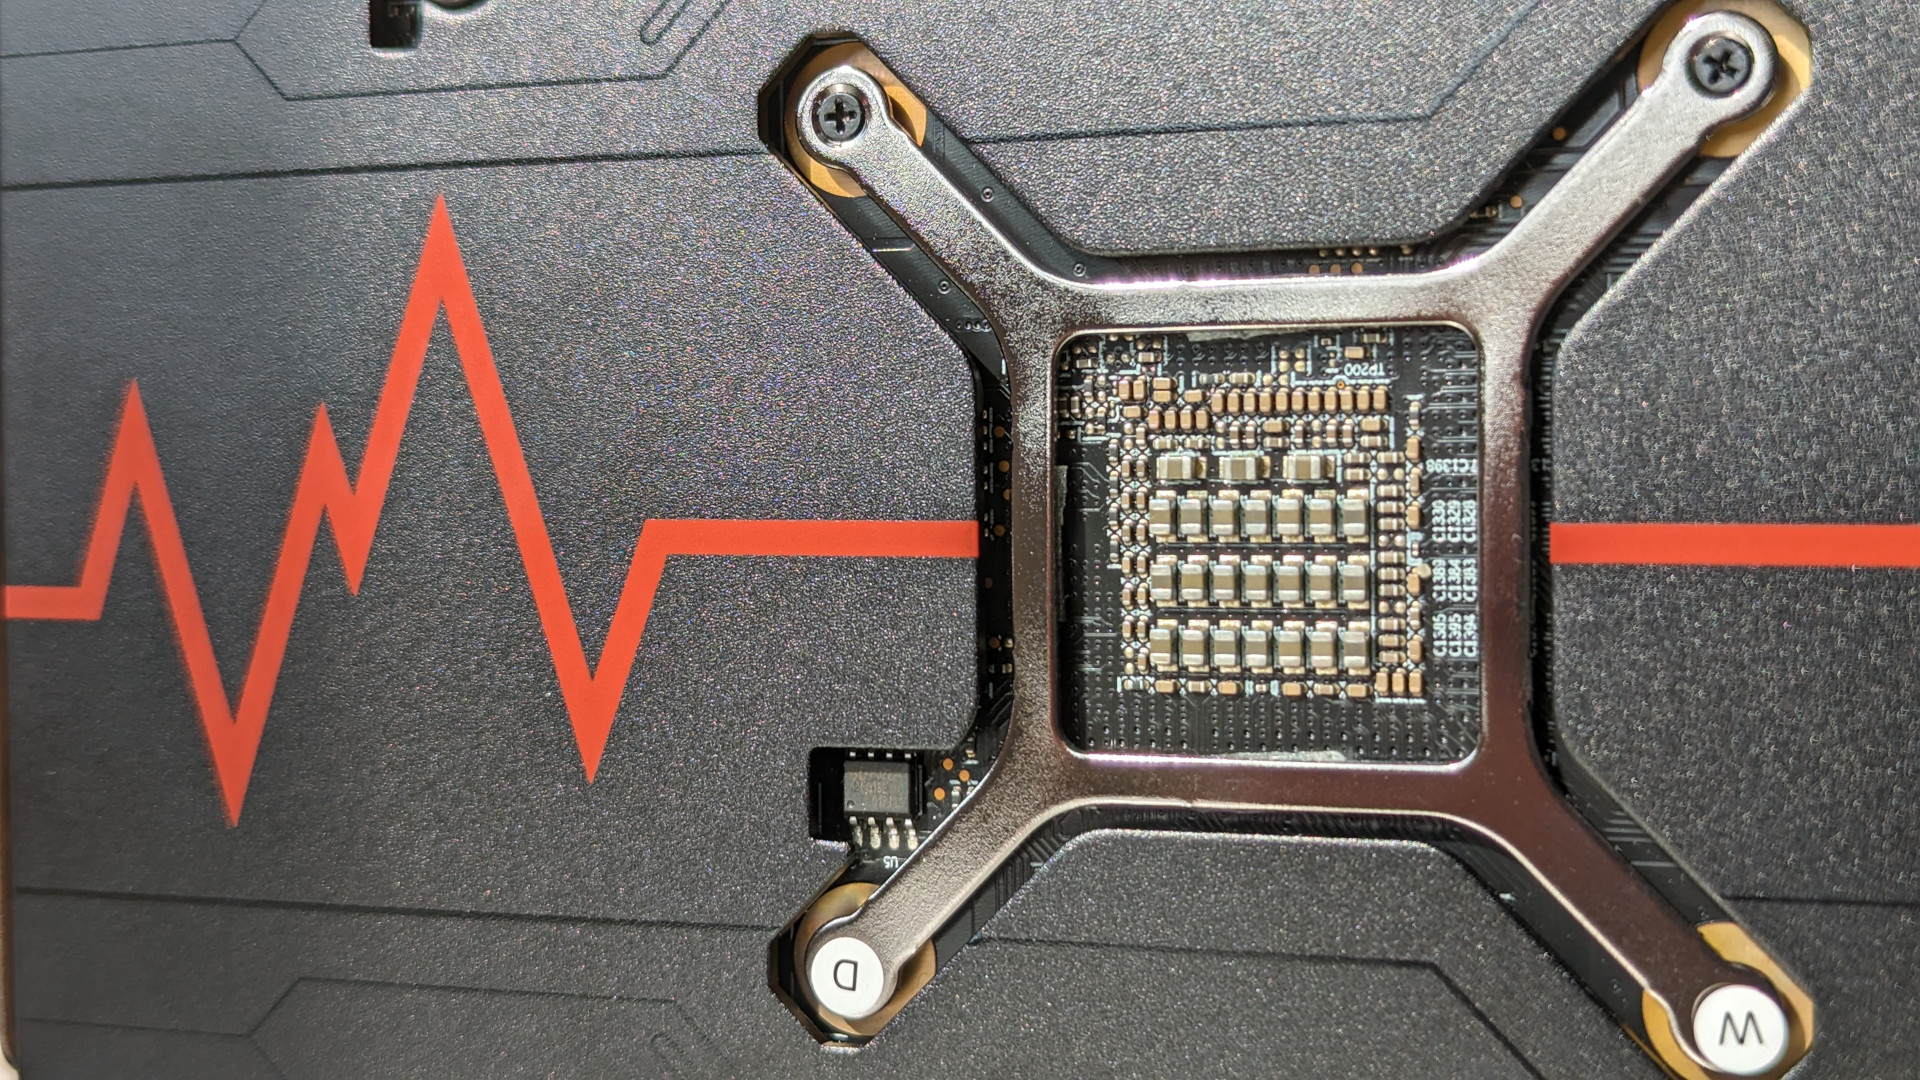 AMD Radeon RX 7600 review: A close-up of the rear of the graphics card, featuring a red pulse graphic on the backplate and exposed silver bracket